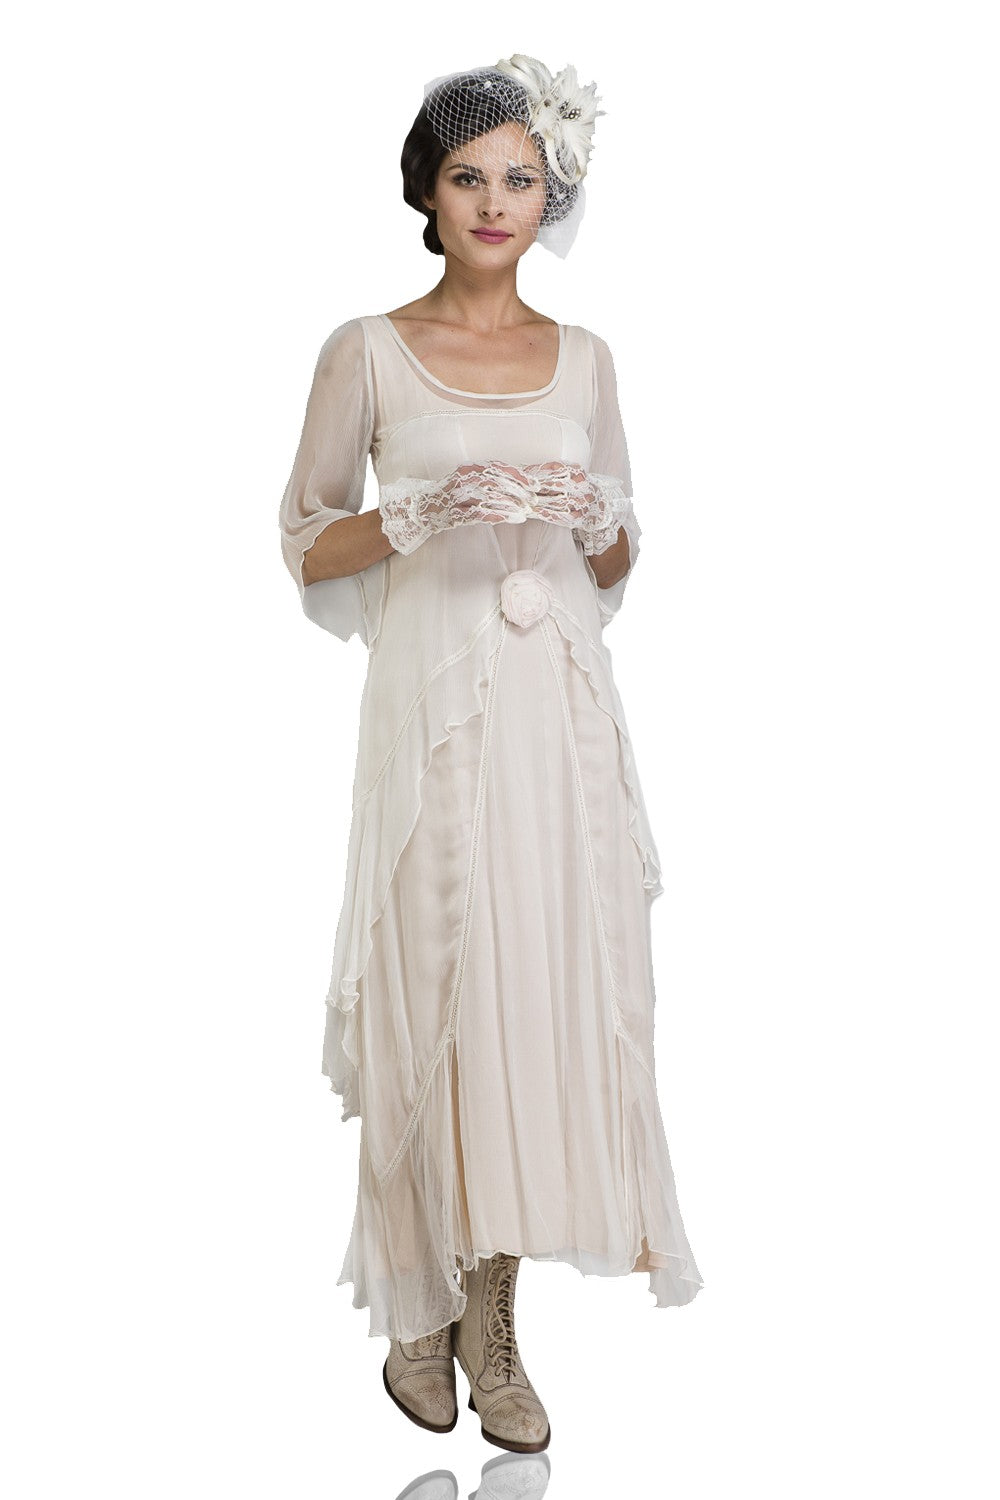 1920s Plus Size Flapper Dresses, Gatsby Dresses, Flapper Costumes Great Gatsby Party Dress in Ivory by Nataya $249.00 AT vintagedancer.com